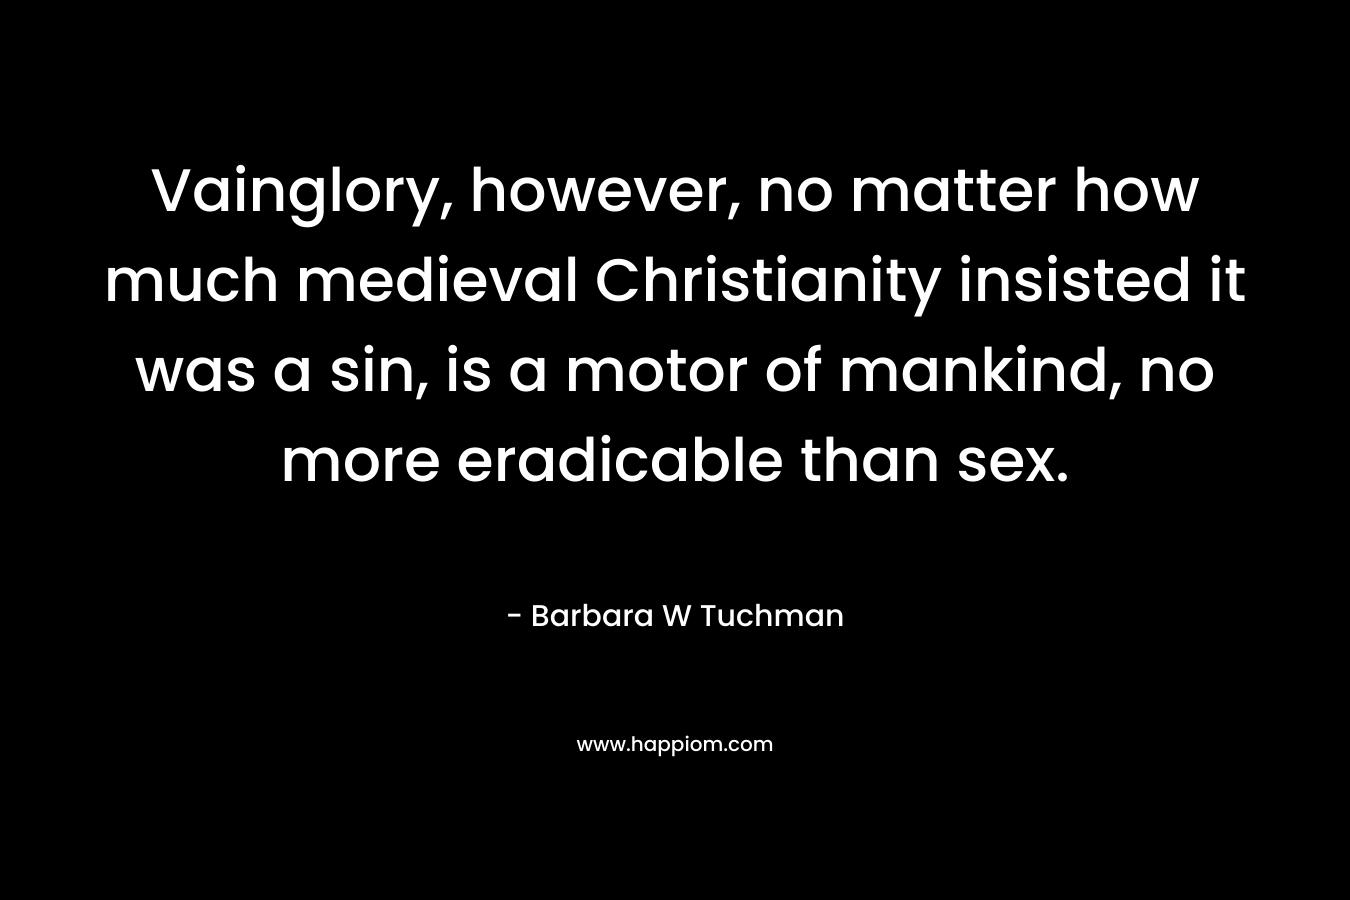 Vainglory, however, no matter how much medieval Christianity insisted it was a sin, is a motor of mankind, no more eradicable than sex. – Barbara W Tuchman